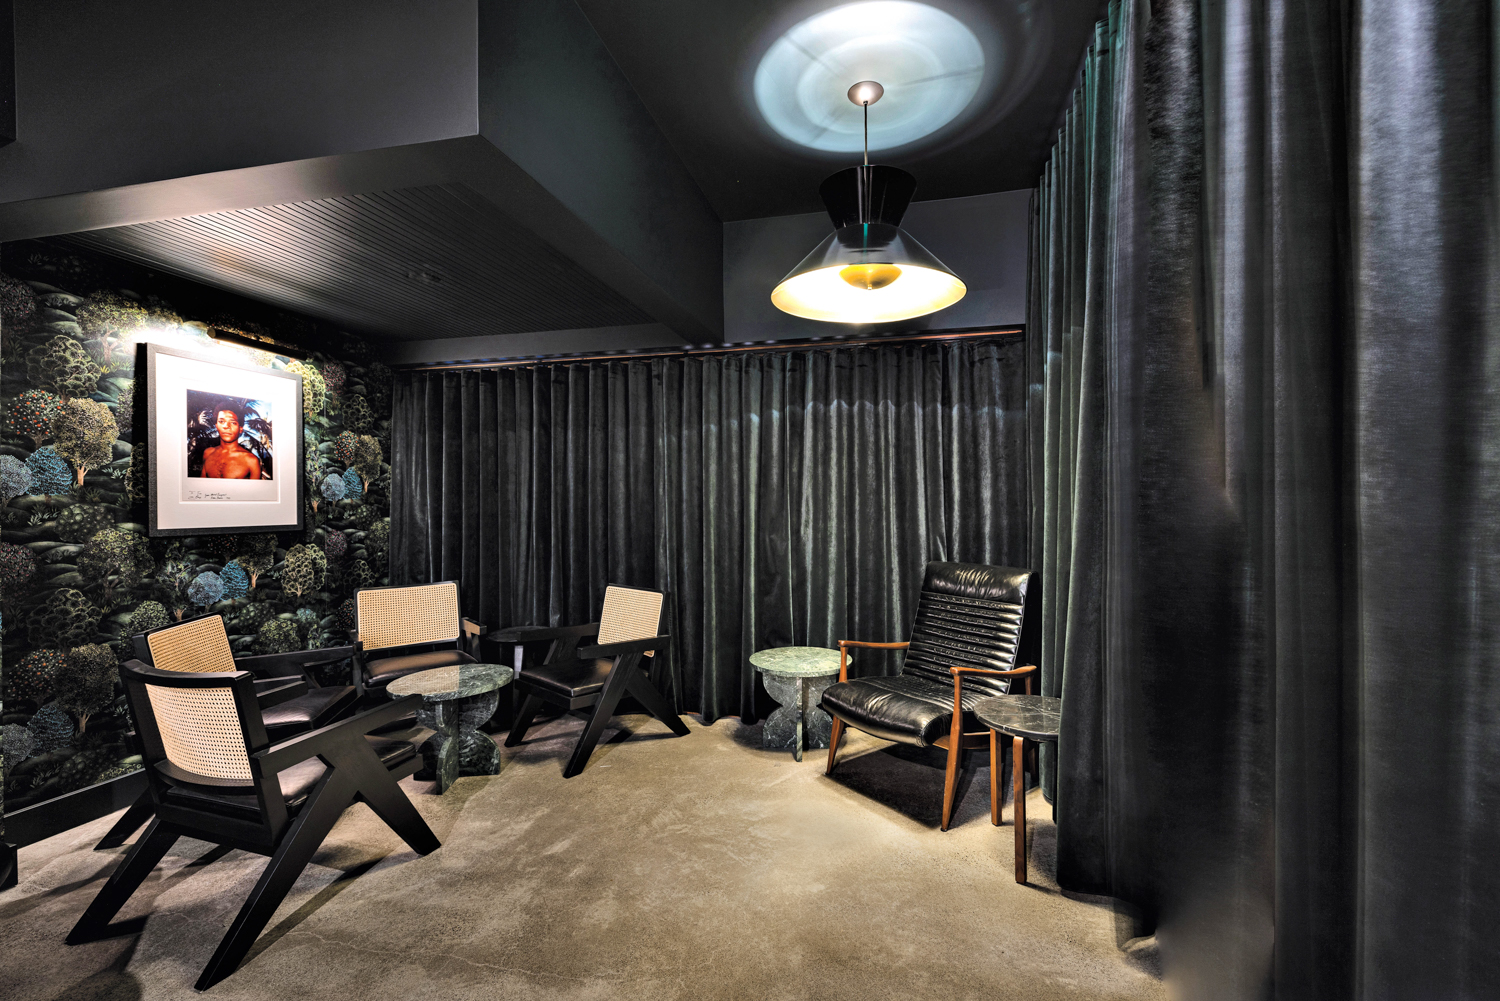 Sitting area of Sousòl with caned chairs and stone accent tables surrounded by dark velvet curtains